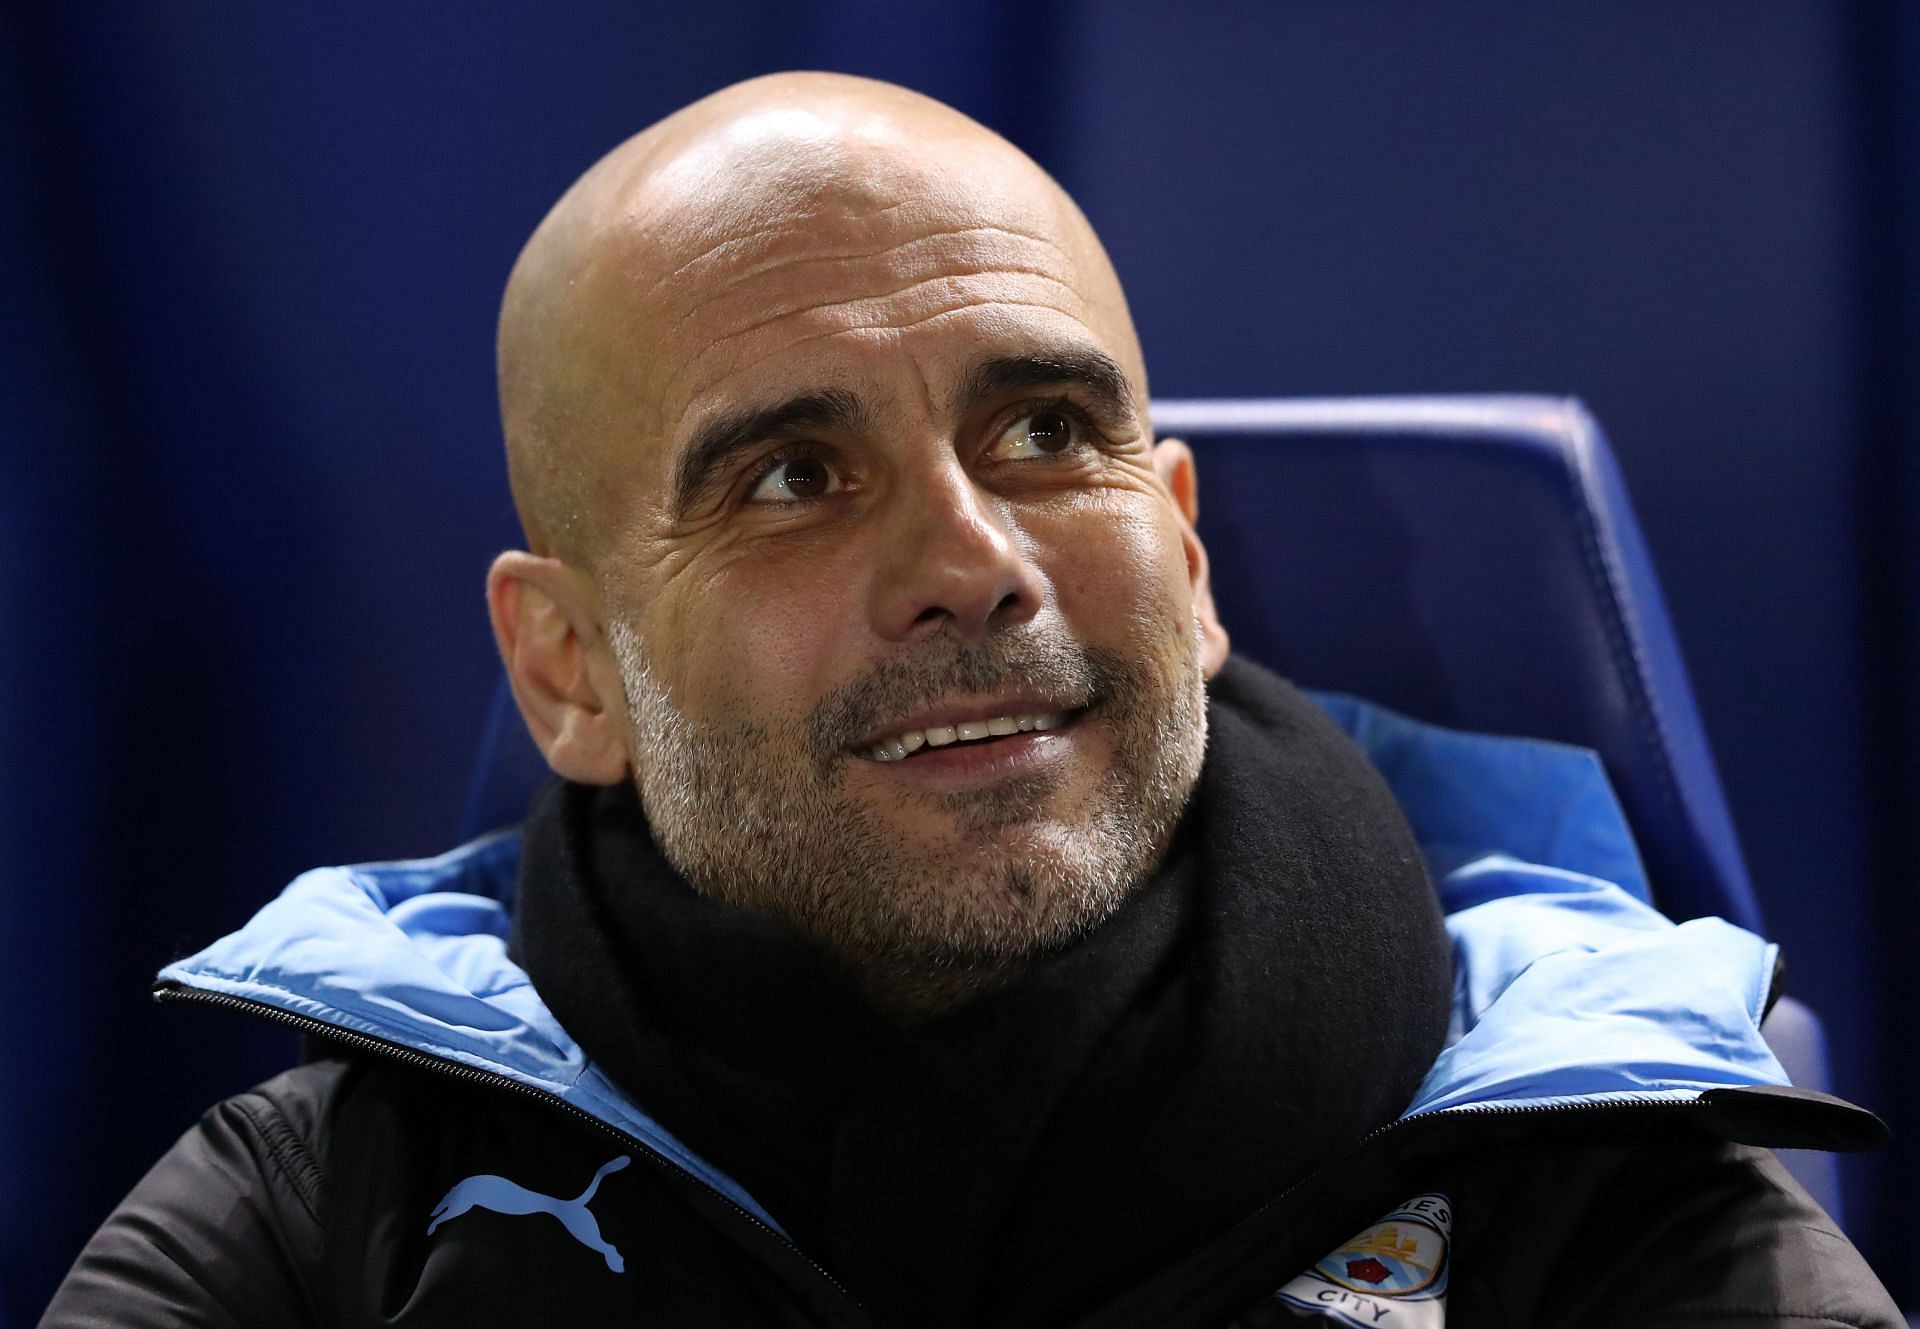 Sheffield Wednesday v Manchester City - FA Cup Fifth Round